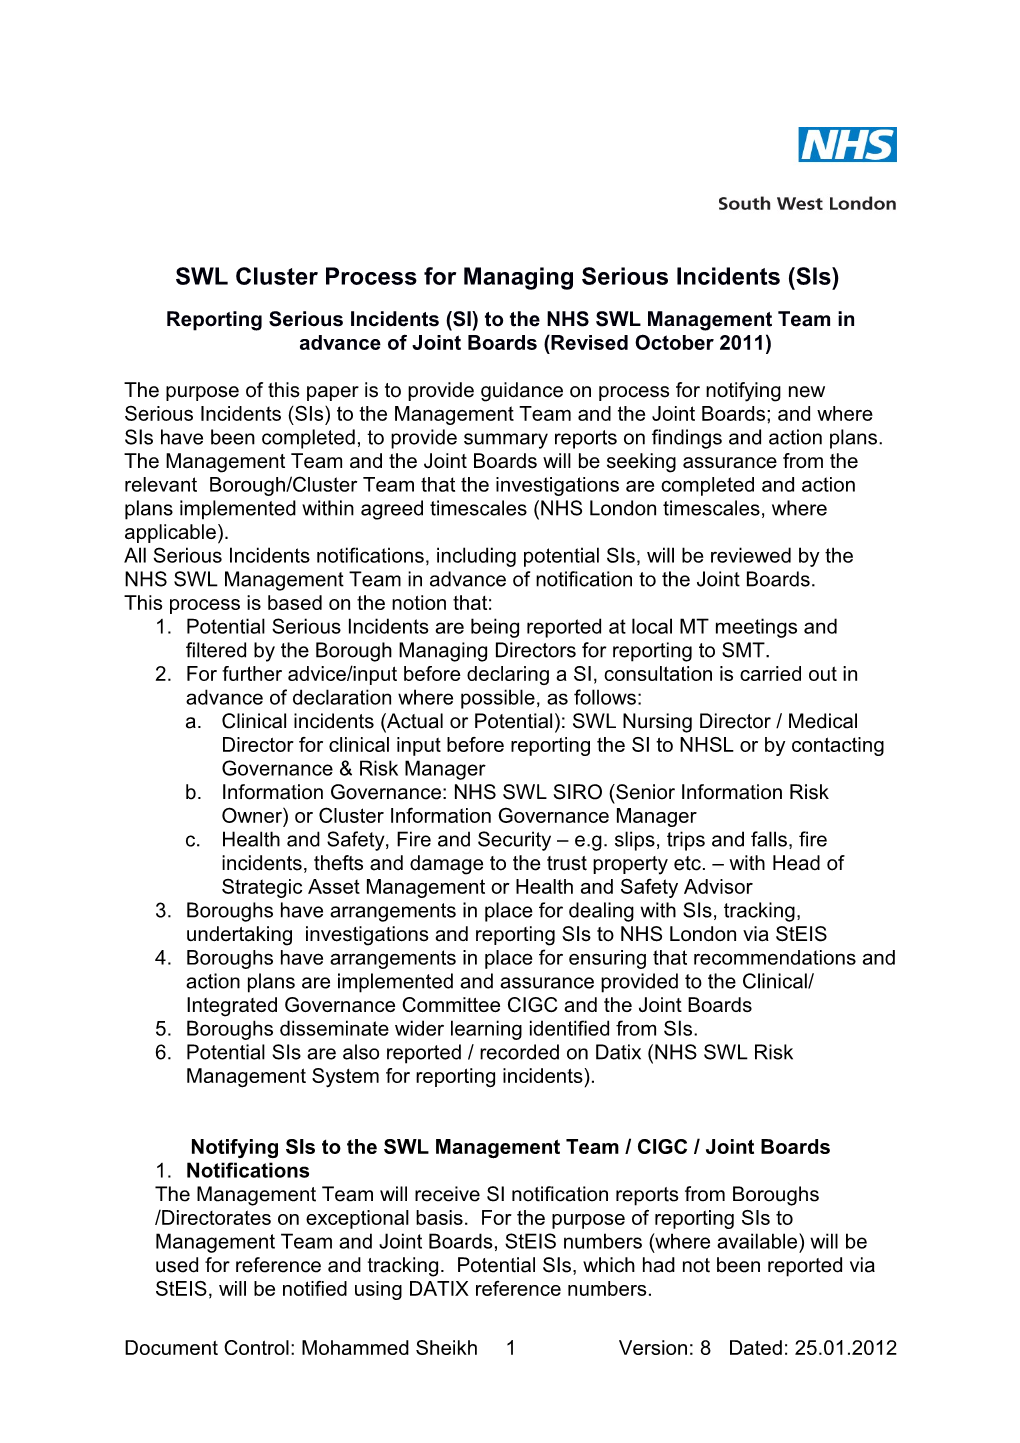 SWL Cluster Process for Managing Serious Incidents (Sis)